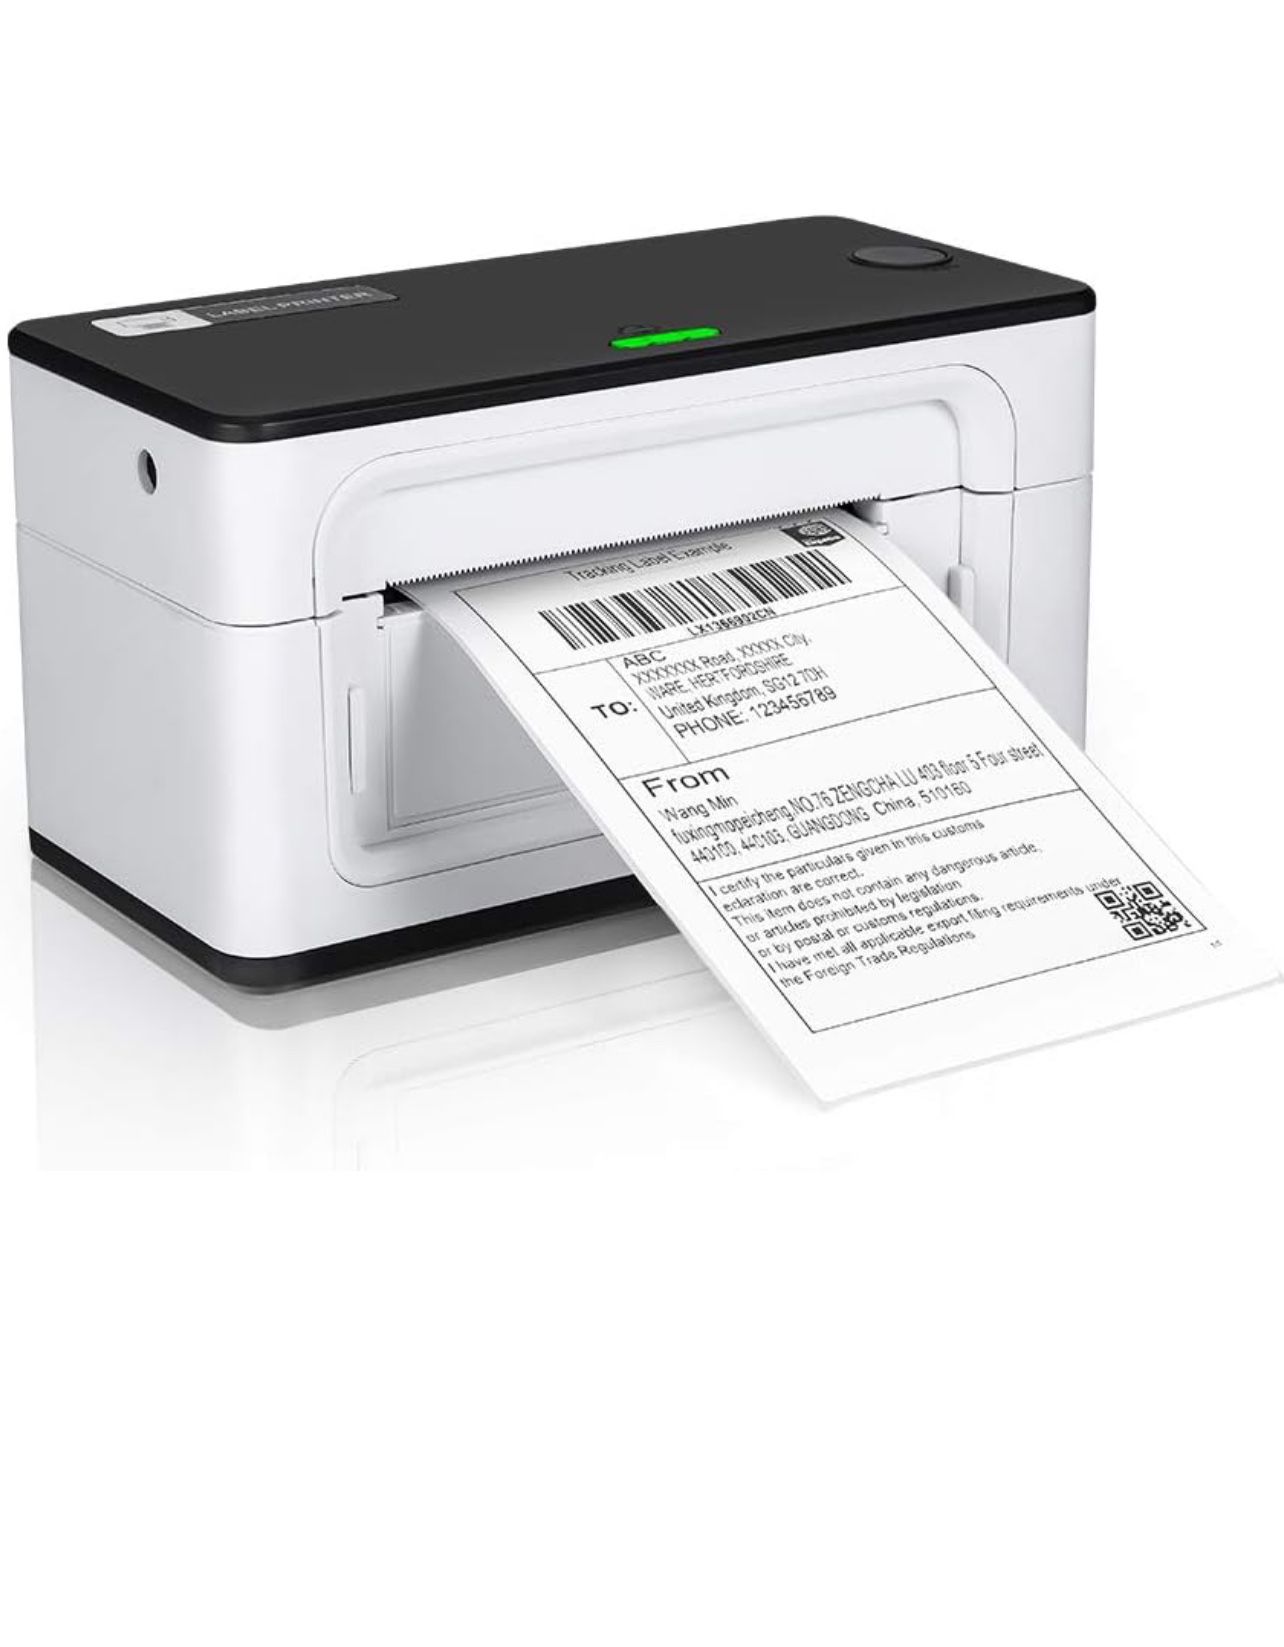 MUNBYN P941 USB Shipping Label Printer Compatible with Chrome, Mac Os, Windows, Linux, White